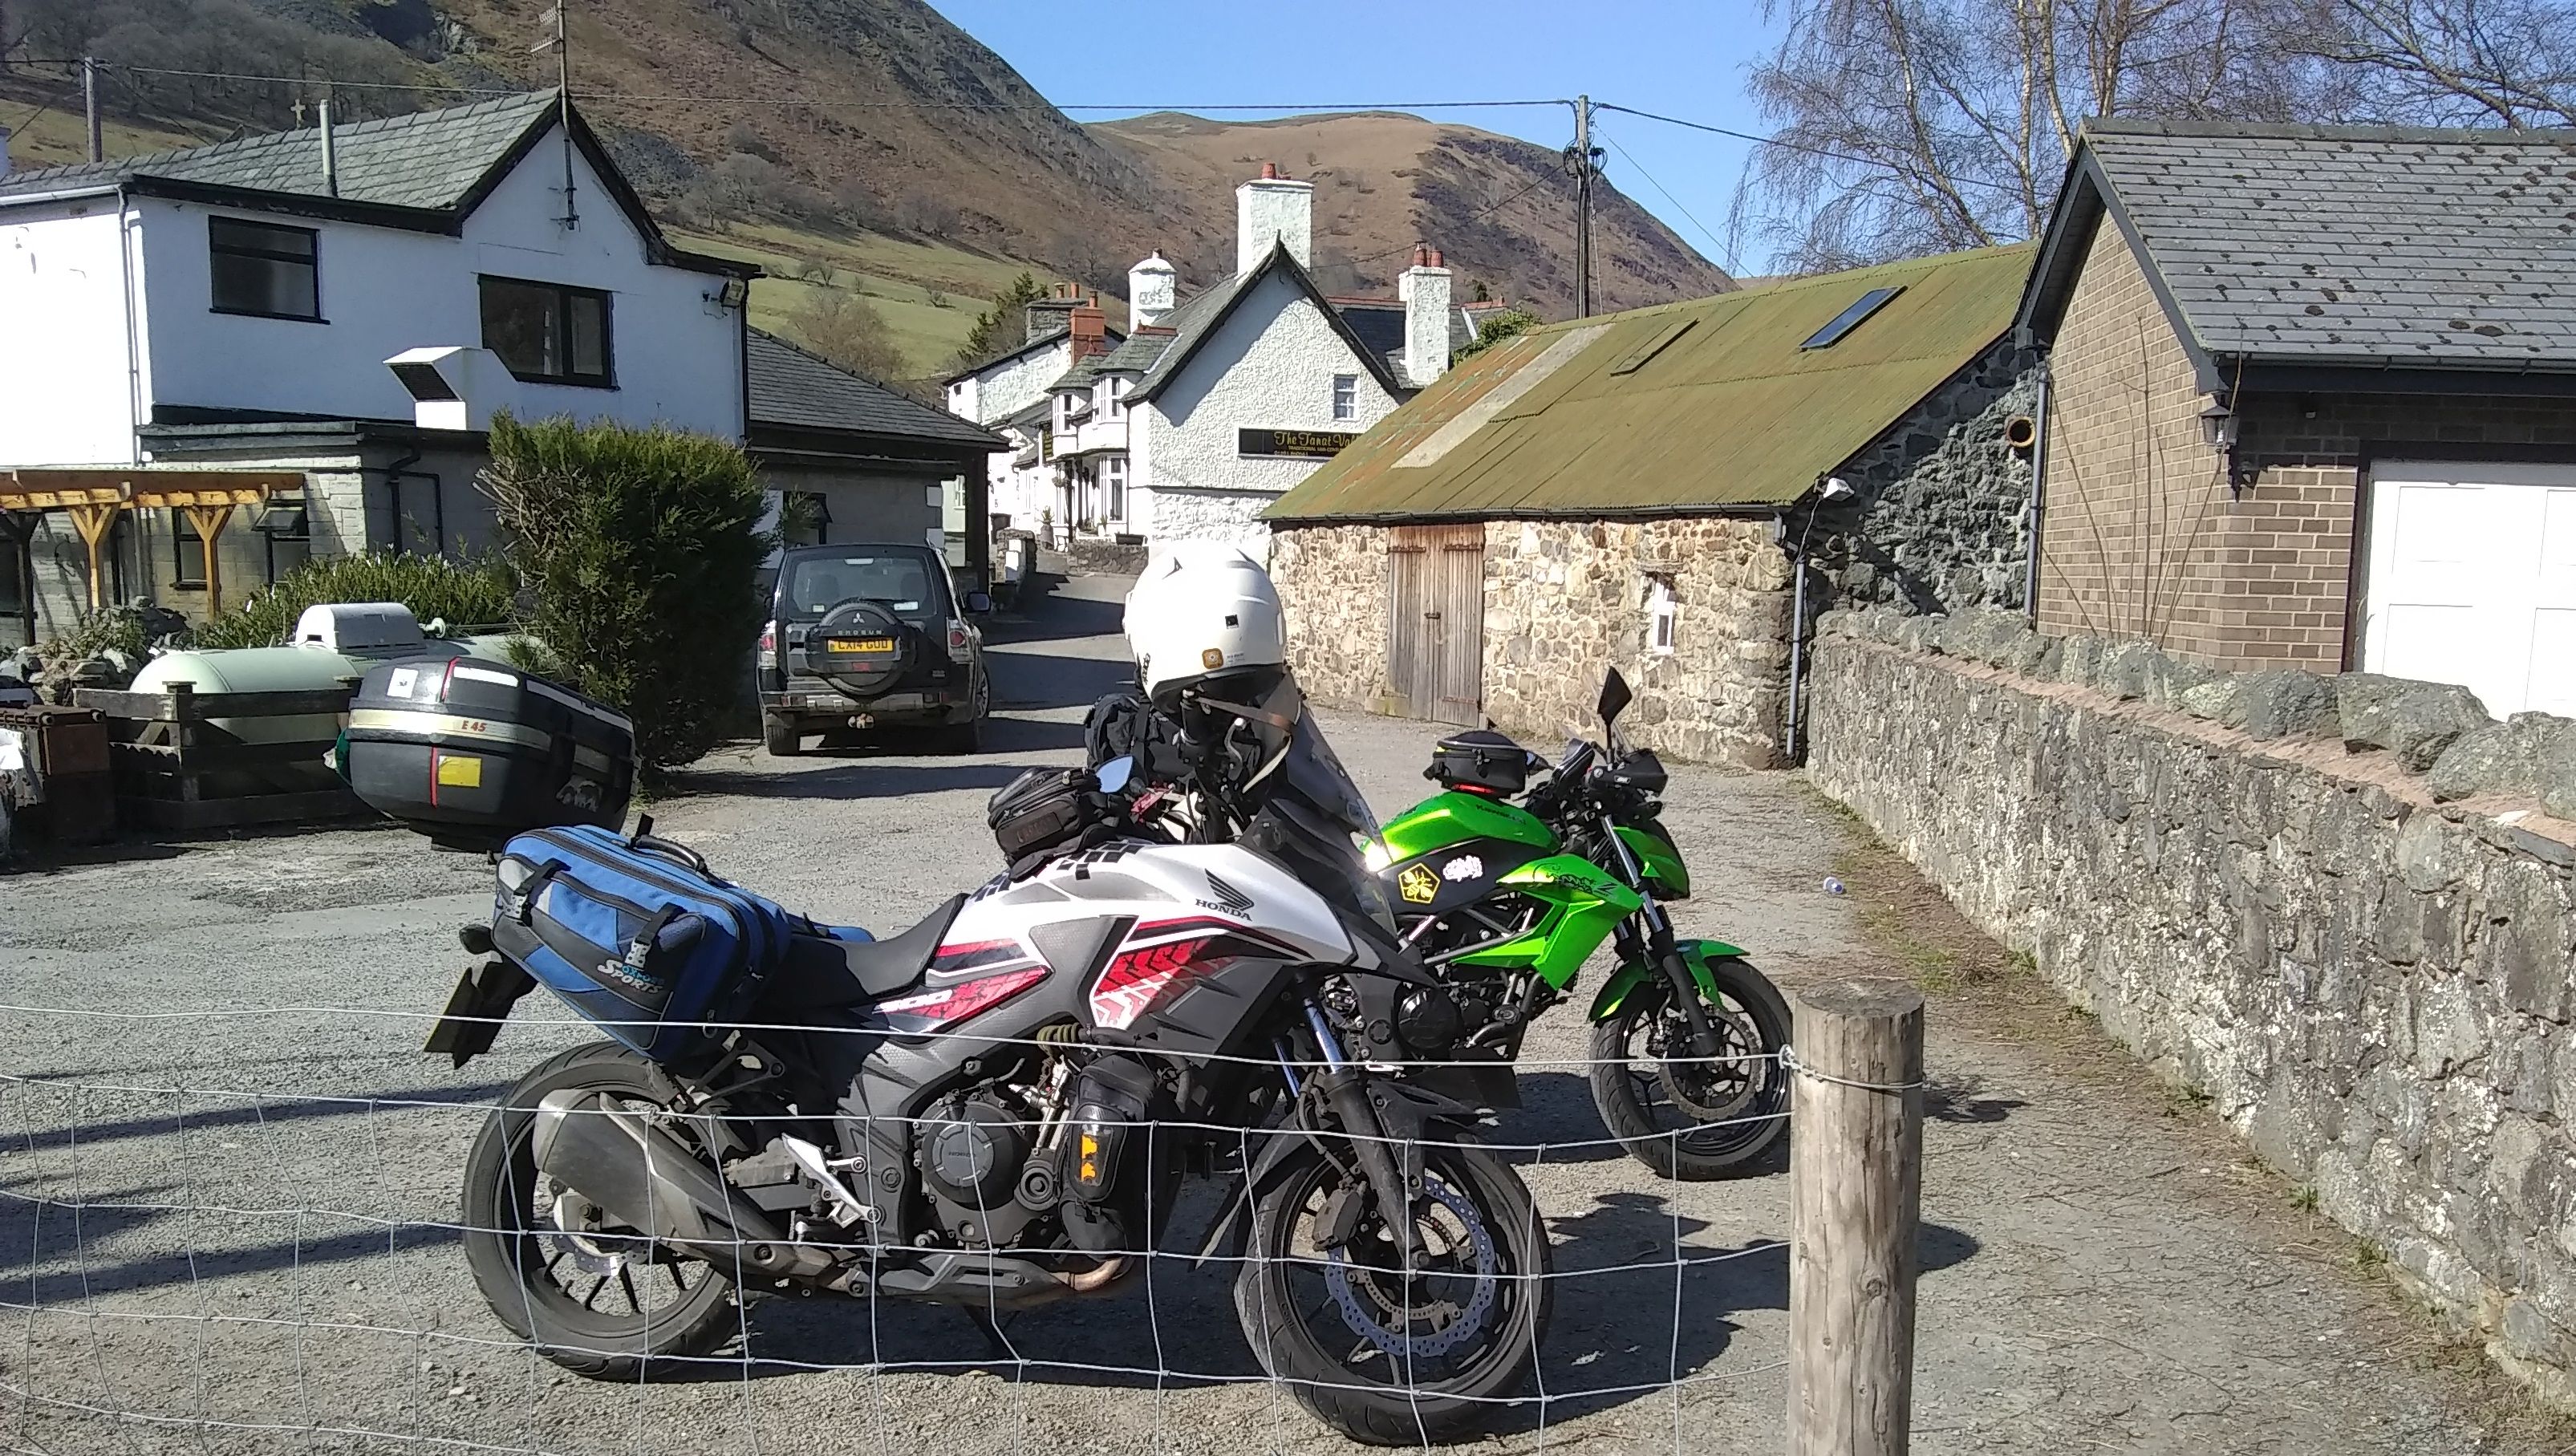 2 motorcycles with luggage with stunning Welsh mountains in the background